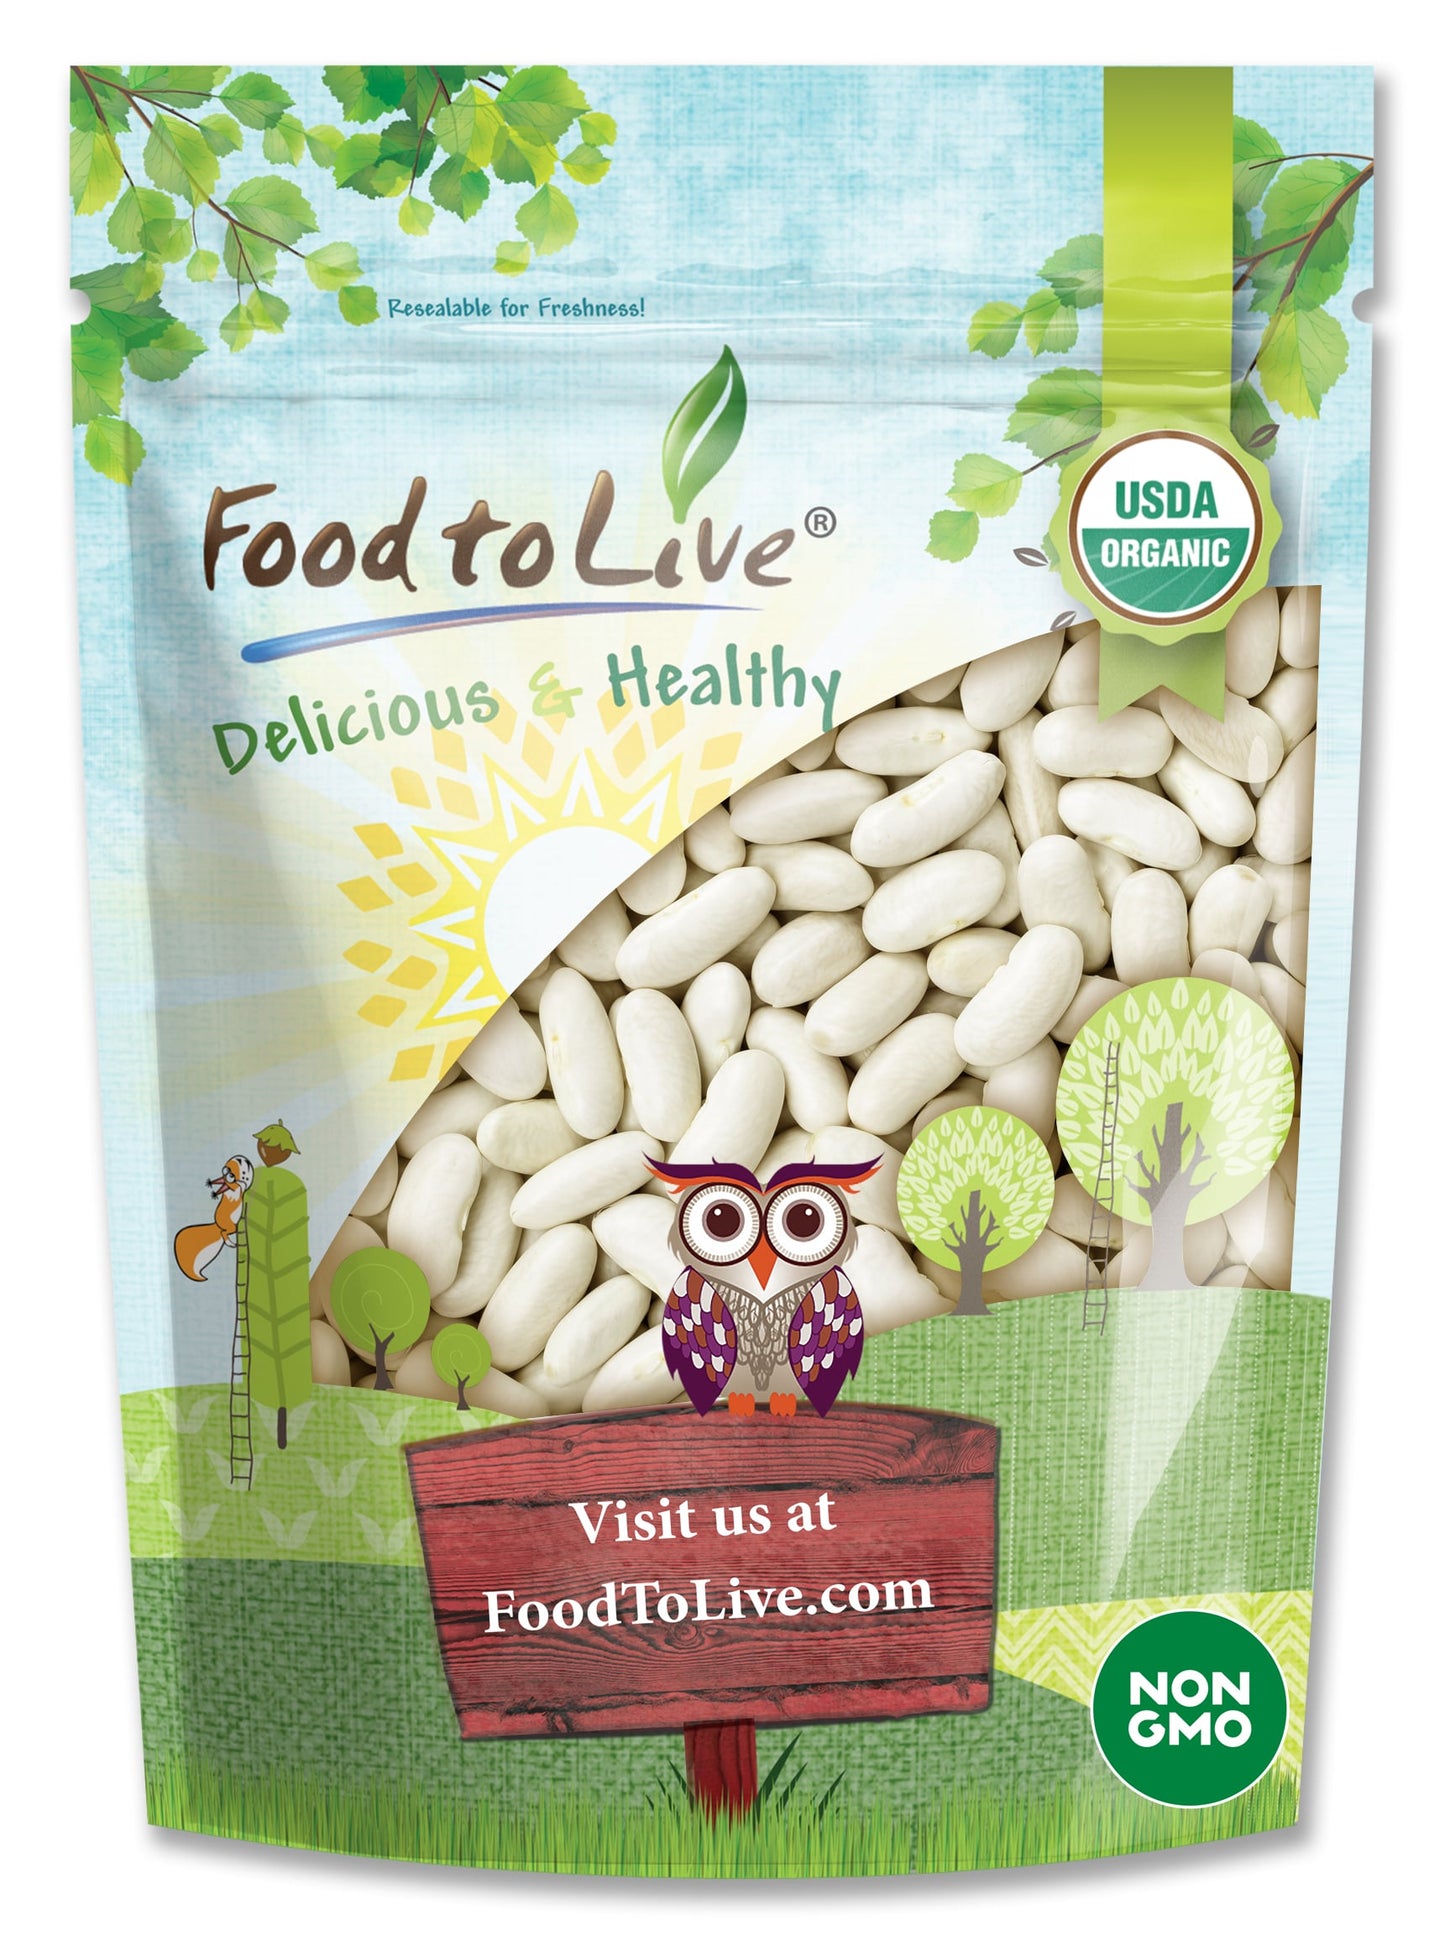 Organic Cannellini Beans - Raw, Dried, Non-GMO, Kosher, White Kidney Beans in Bulk, Product of the USA, Sirtfood - by Food to Live